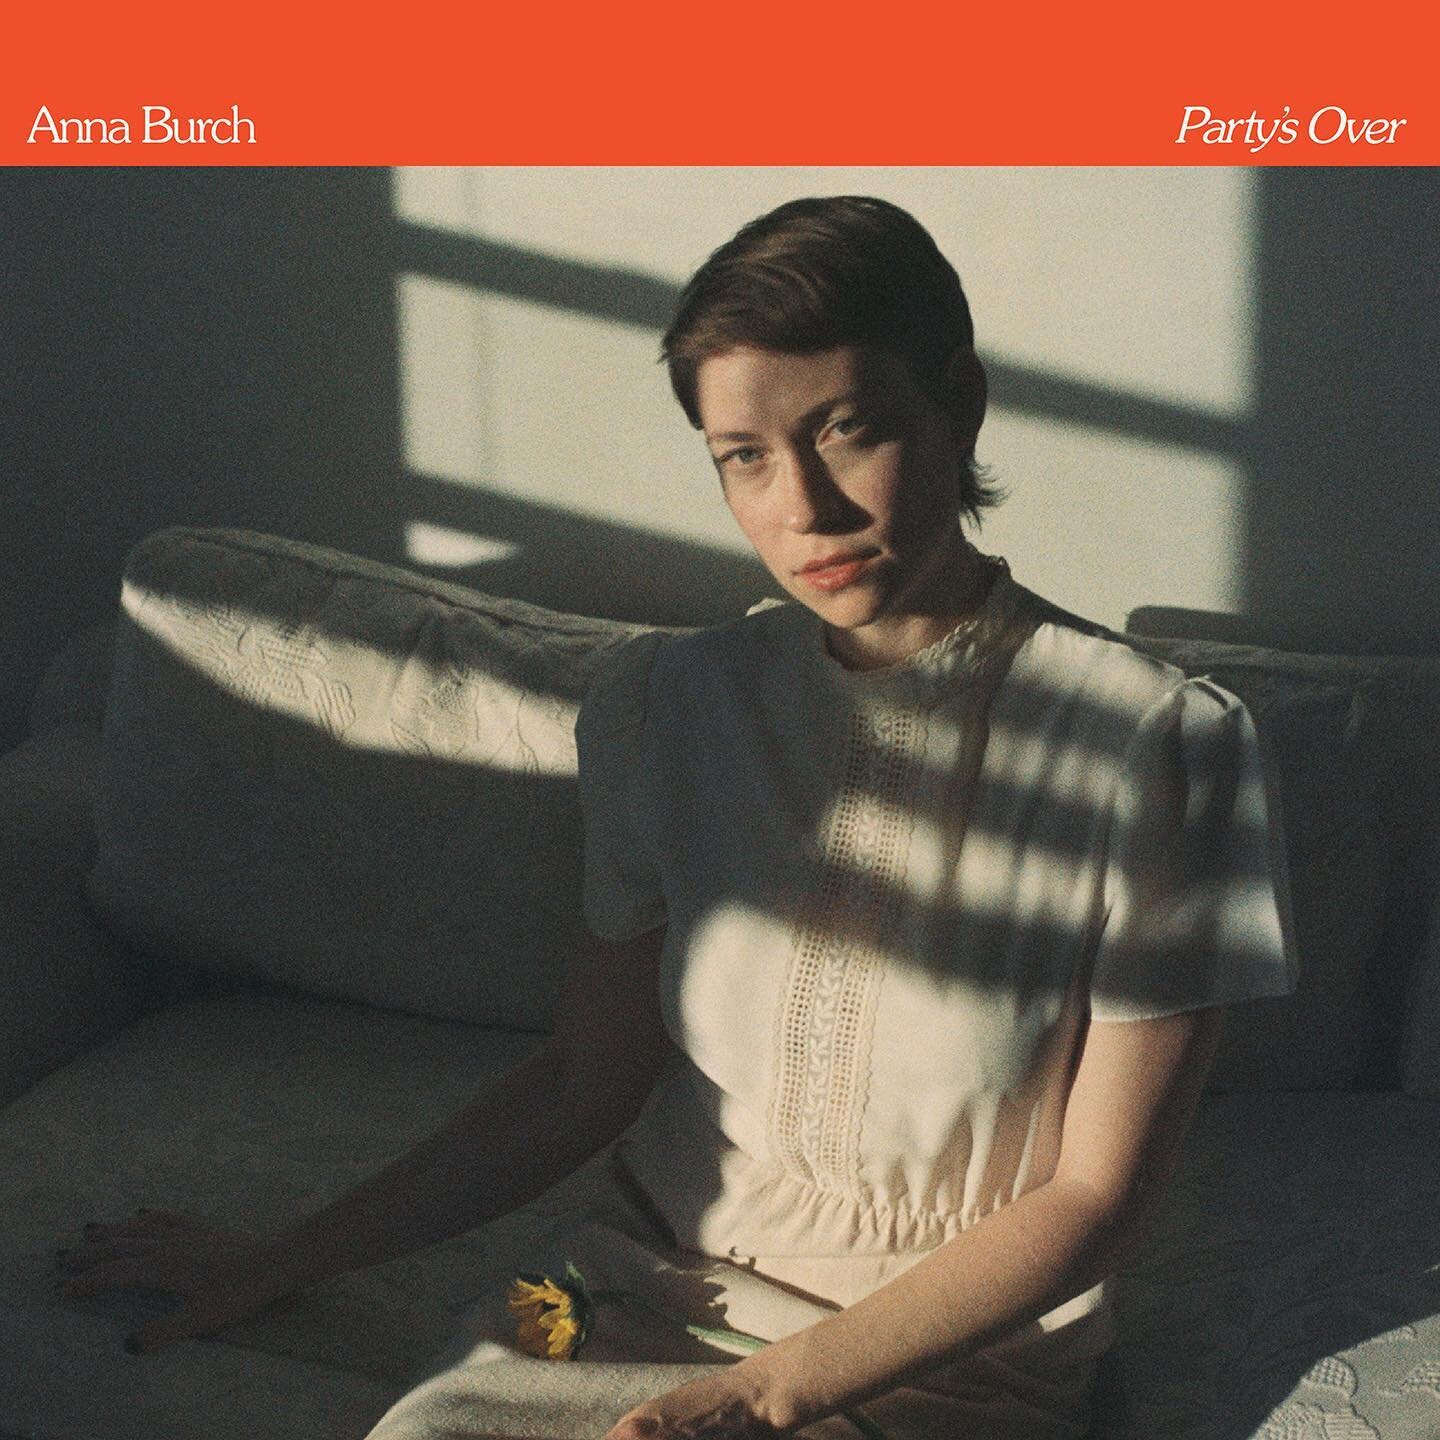 New @annaisaburch single available today 🦜 we had fun with the 12 string in this one 🌞🌞 produced/mixed by me, mastered by the one only @heba_kadry